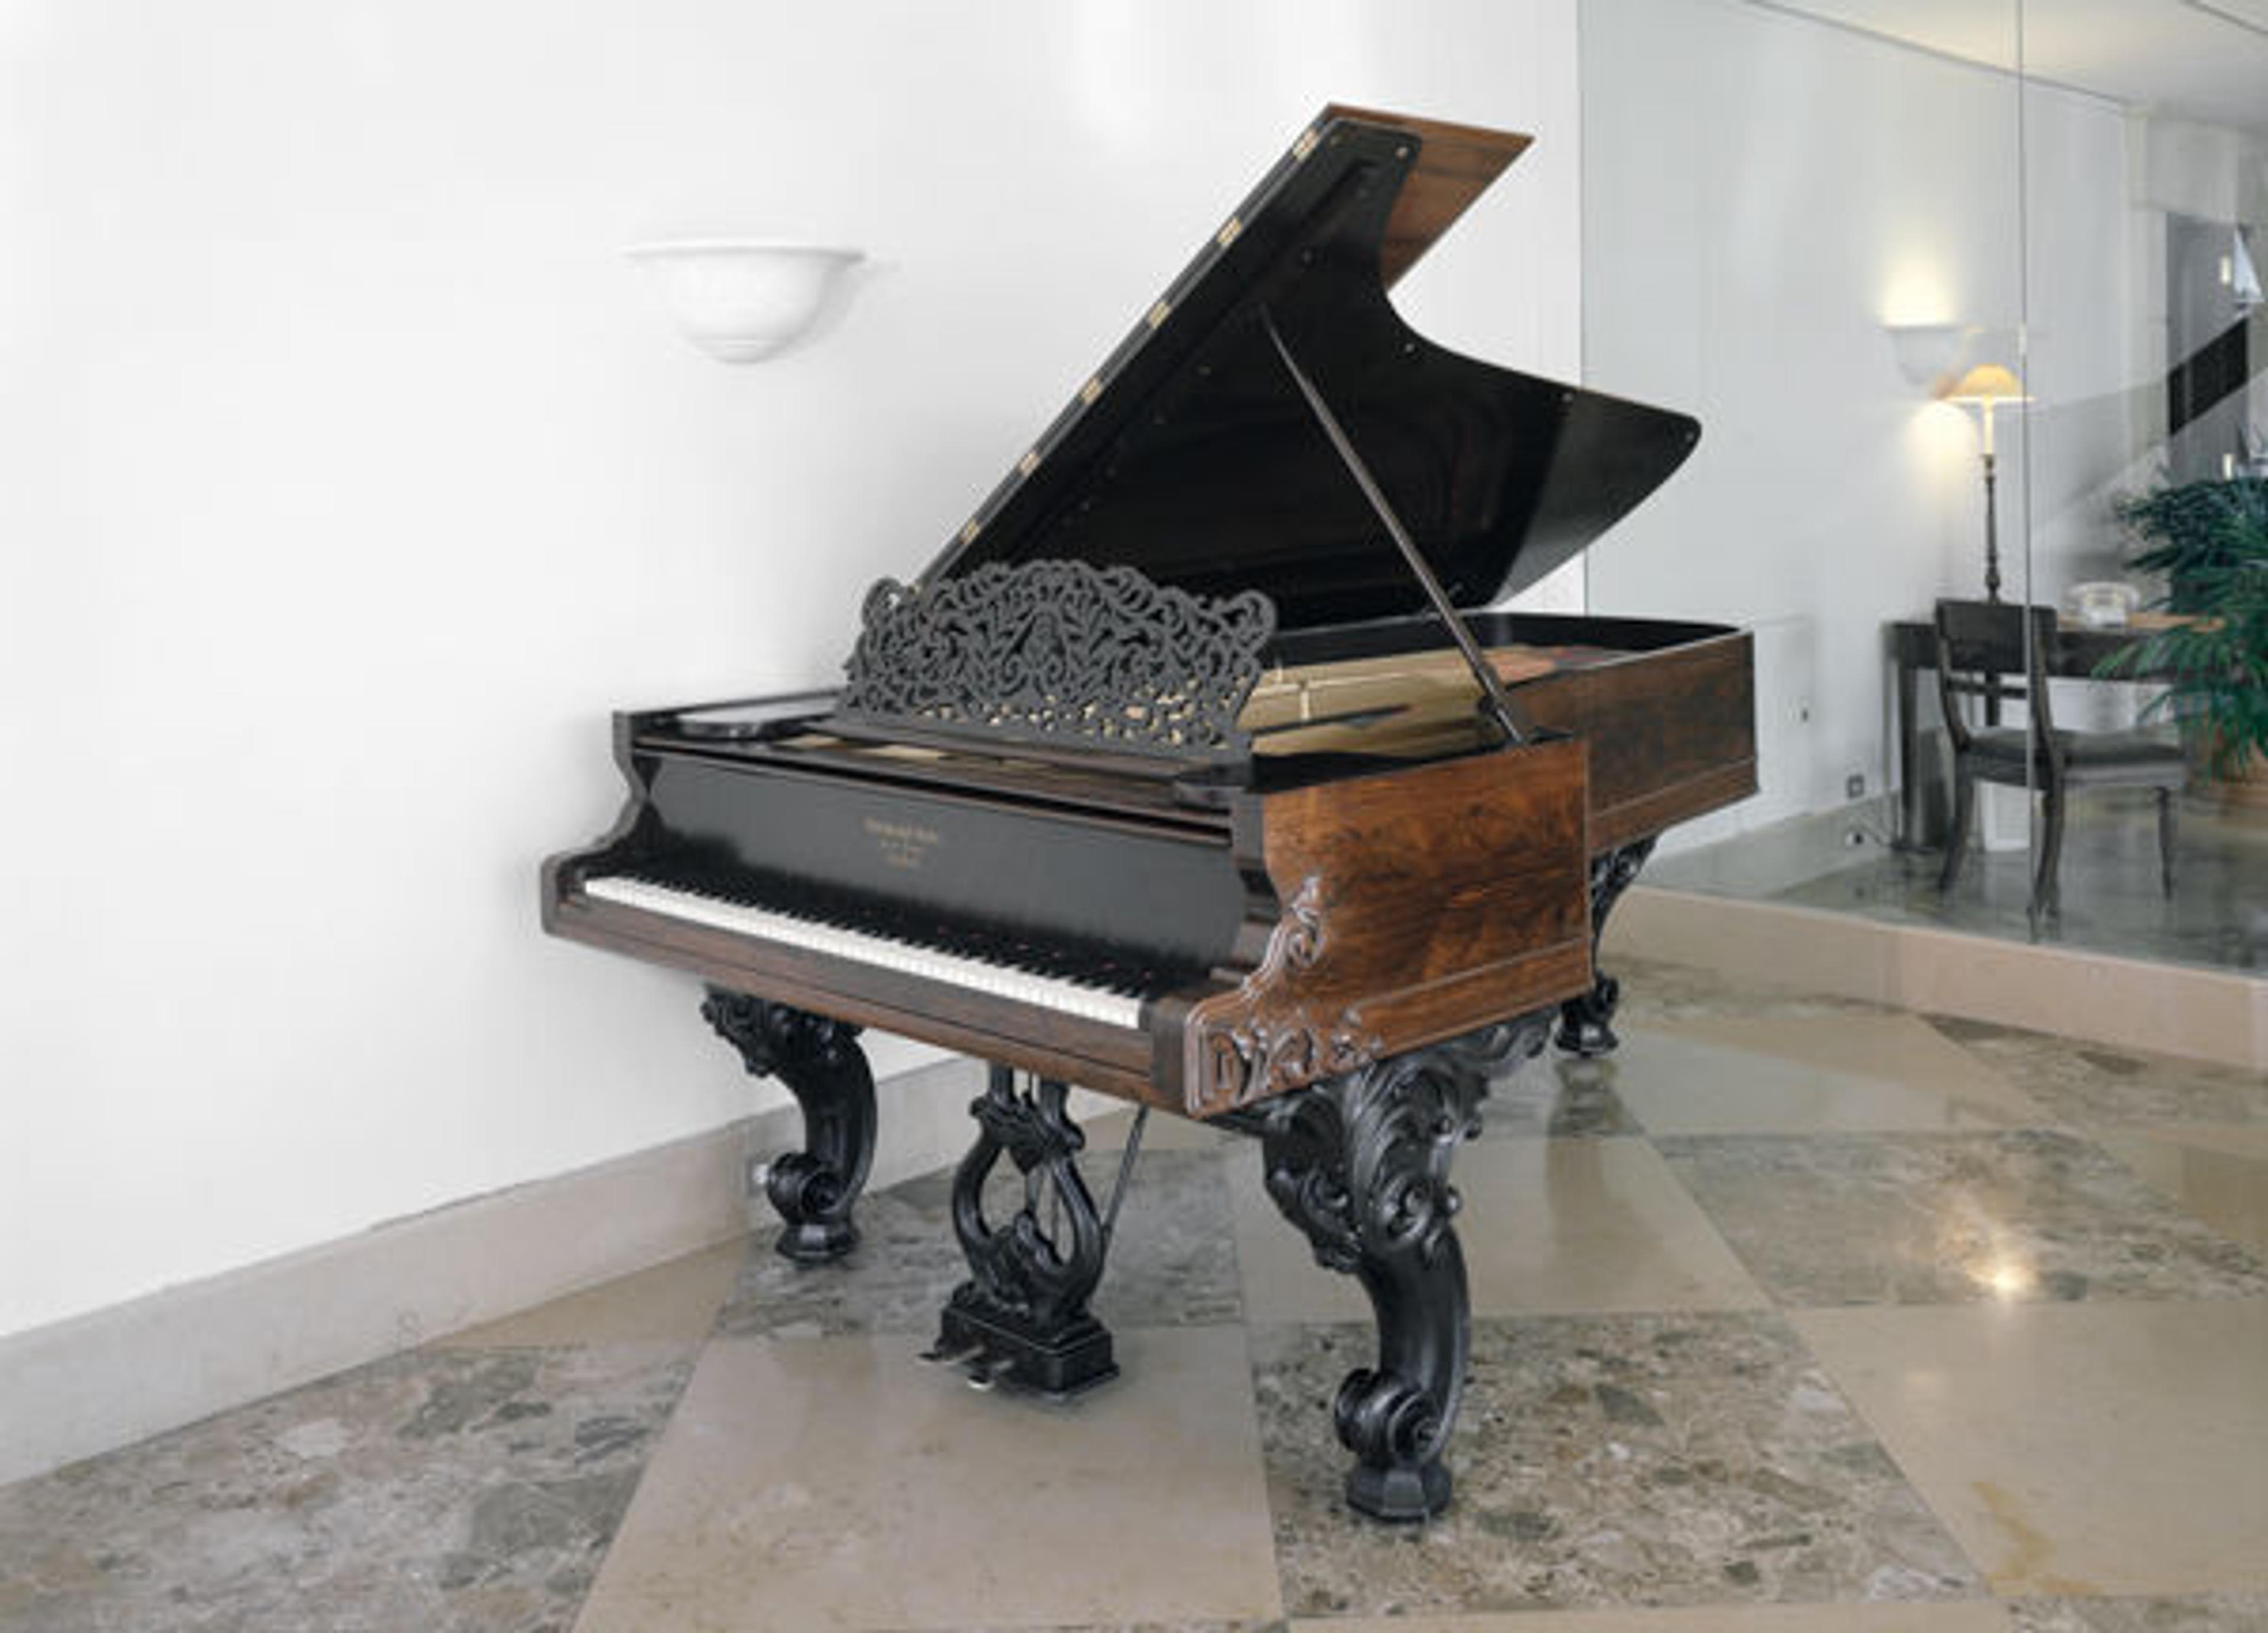 Grand piano, 1868. Steinway & Sons, New York, New York, United States. Wood, metal. The Metropolitan Museum of Art, New York, Gift of Frederick R. Gorreé, 1985 (1985.407)